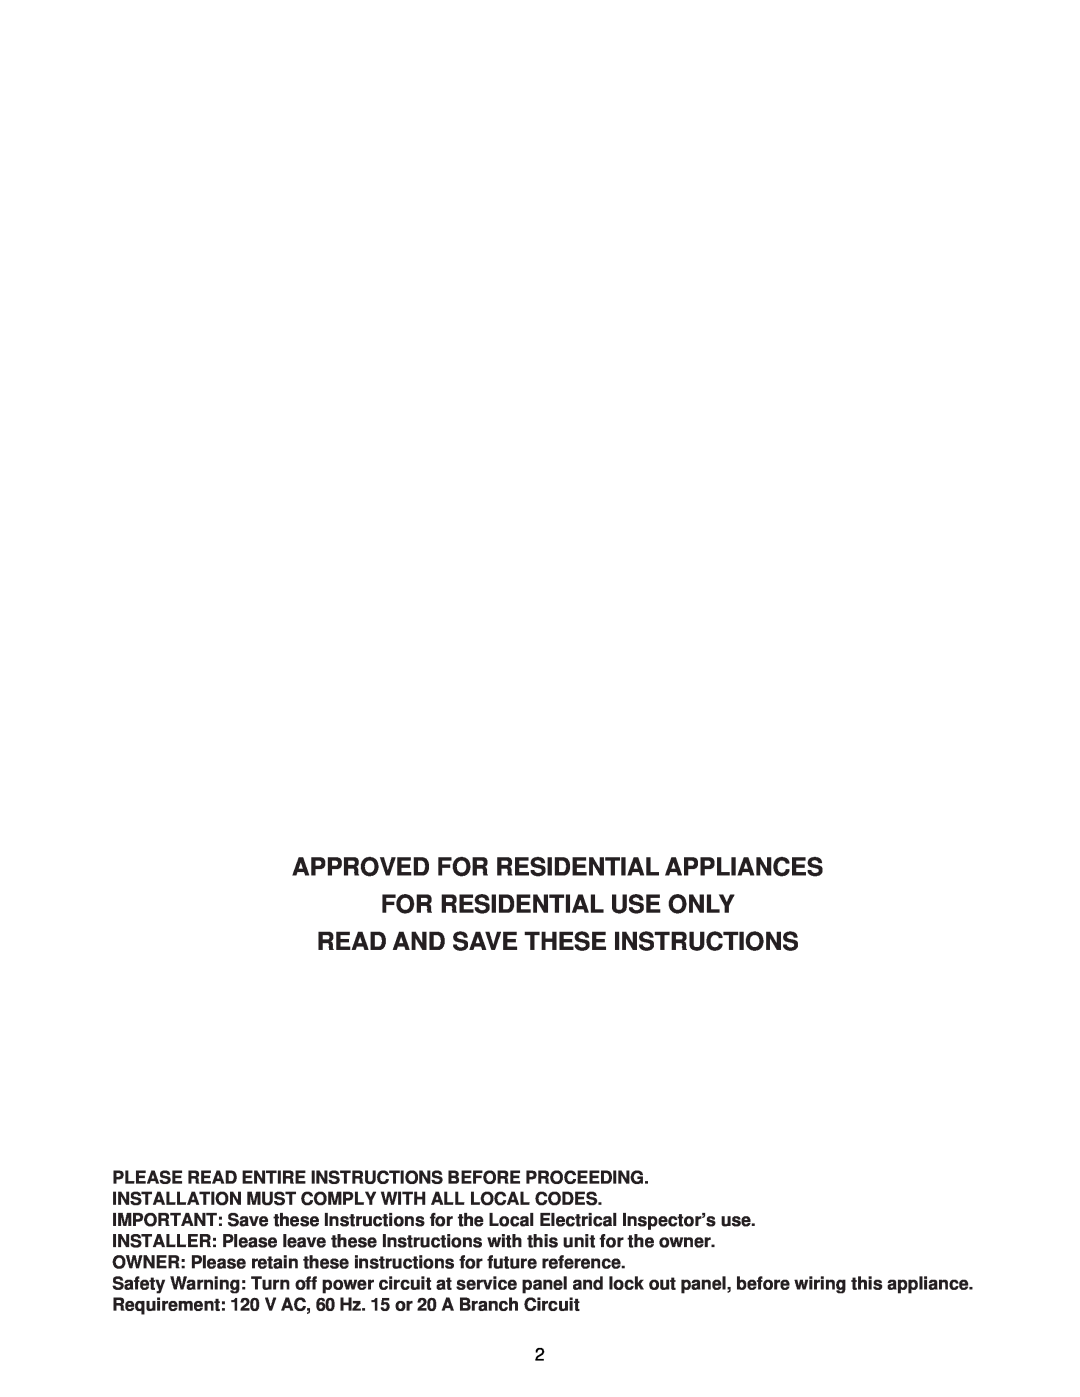 Thermador HMWB36, HMWB30 Approved For Residential Appliances For Residential Use Only, Read And Save These Instructions 